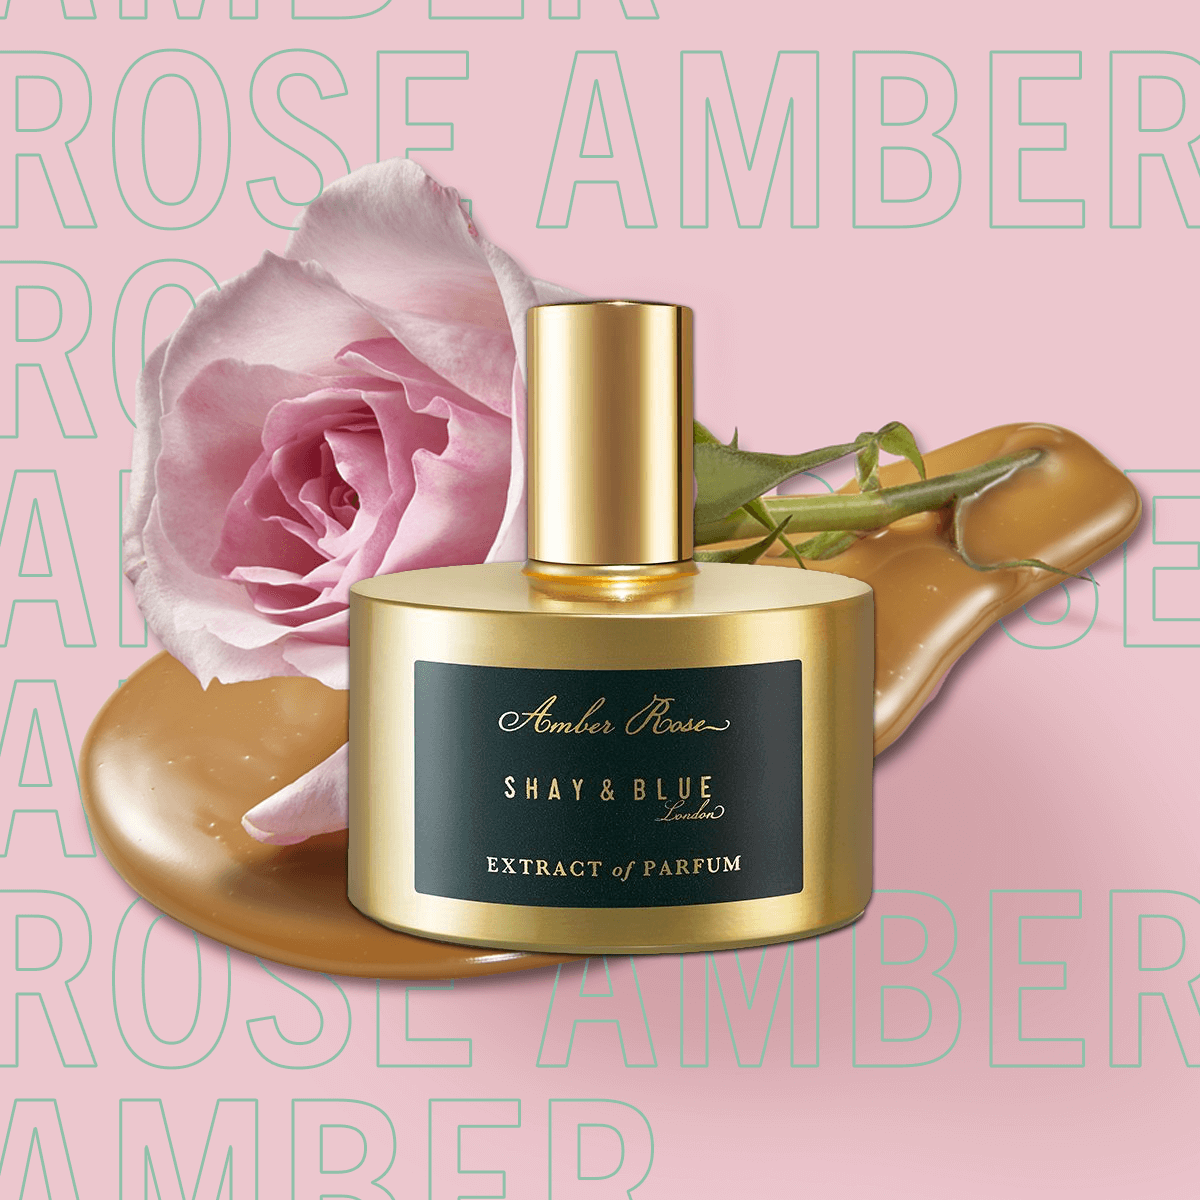 Amber Rose Extract of Parfum 60ml | New season May Rose is blended with white amber and sweet creamy notes. | Clean All Gender Fragrance | Shay & Blue